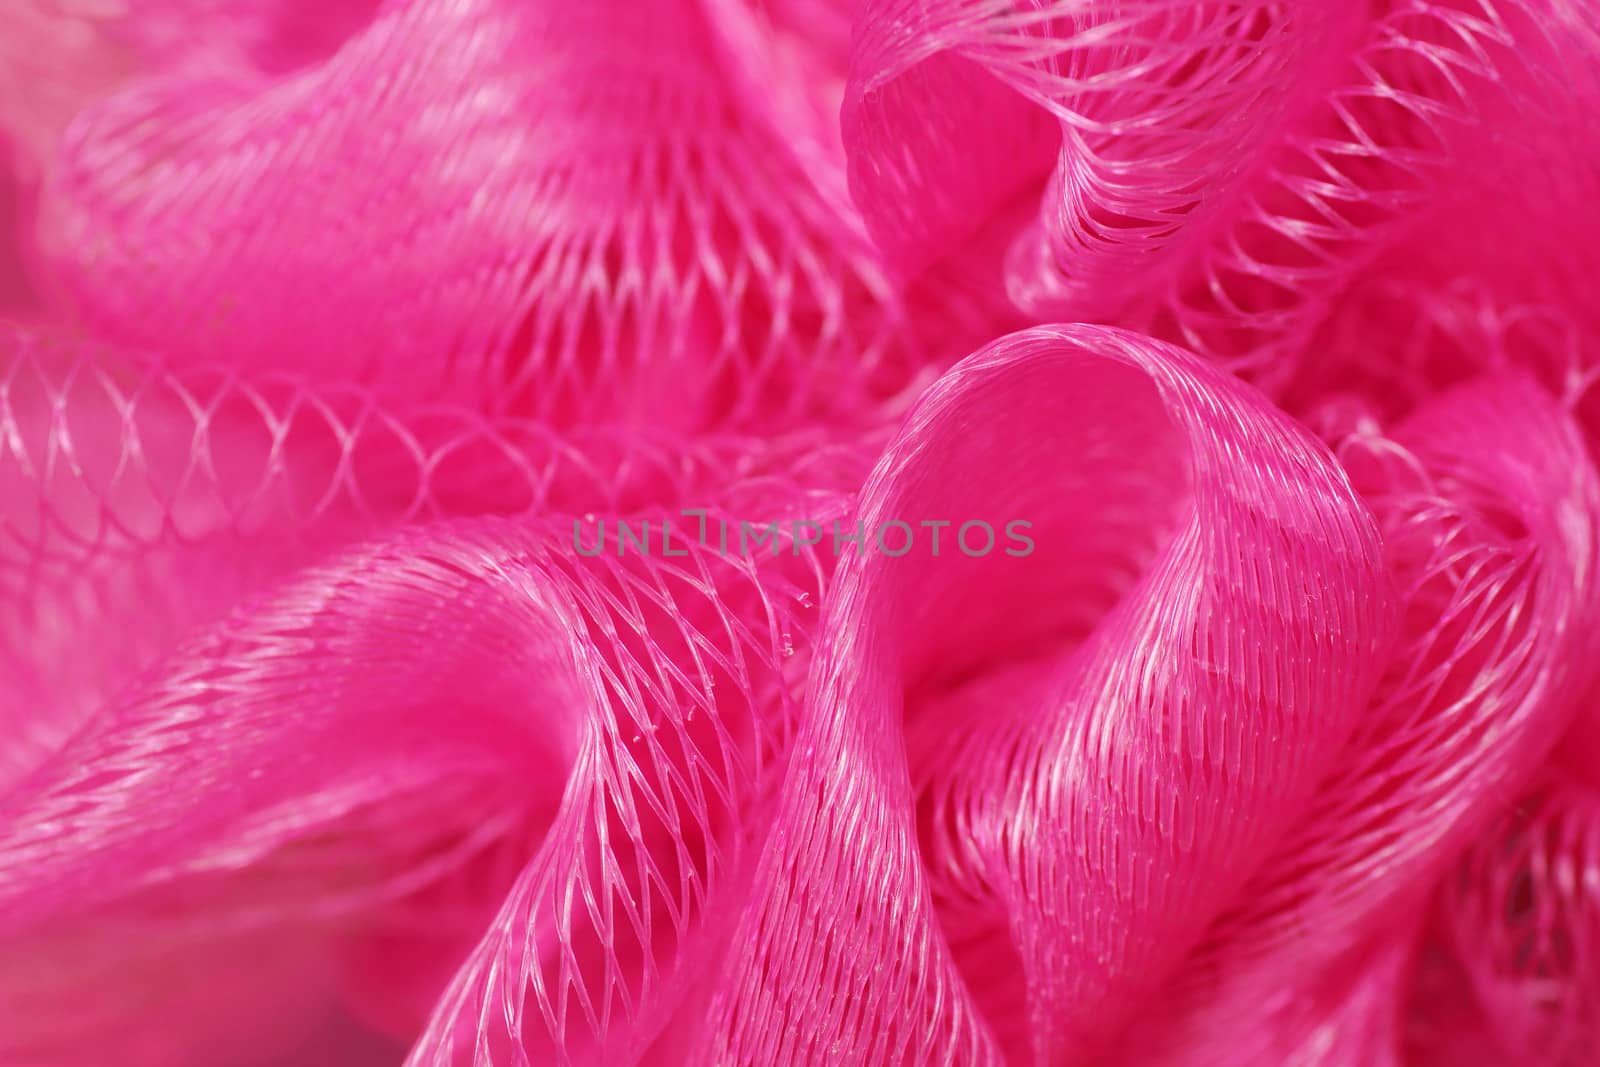 Macro of a pink bath puff or sponge, plastic mesh detail, texture background.